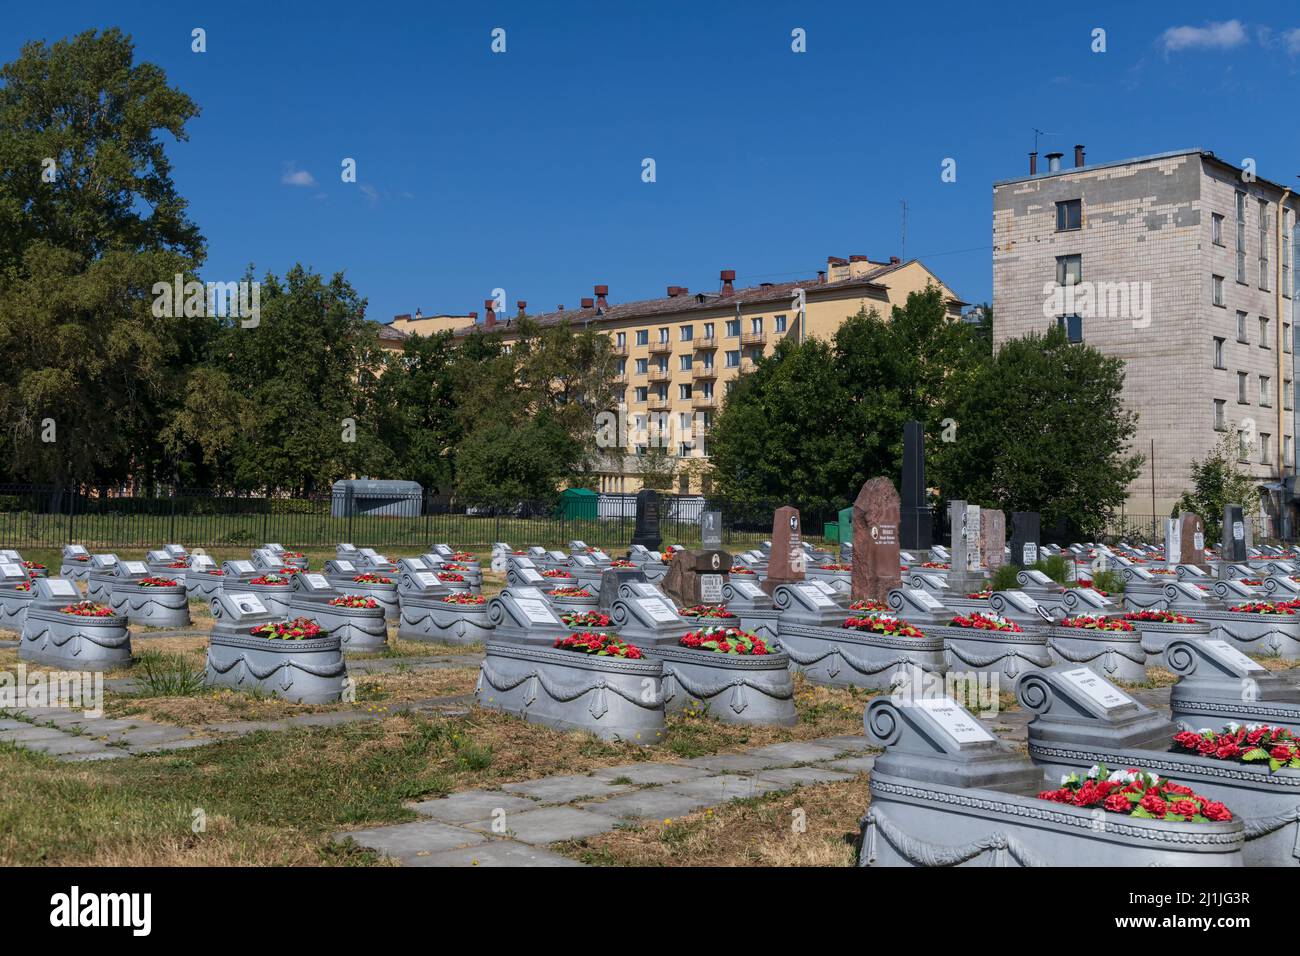 Saint Petersburg, Russia - July 18, 2021: Military memorial cemetery of the Second World War during the siege of Leningrad near residential buildings Stock Photo